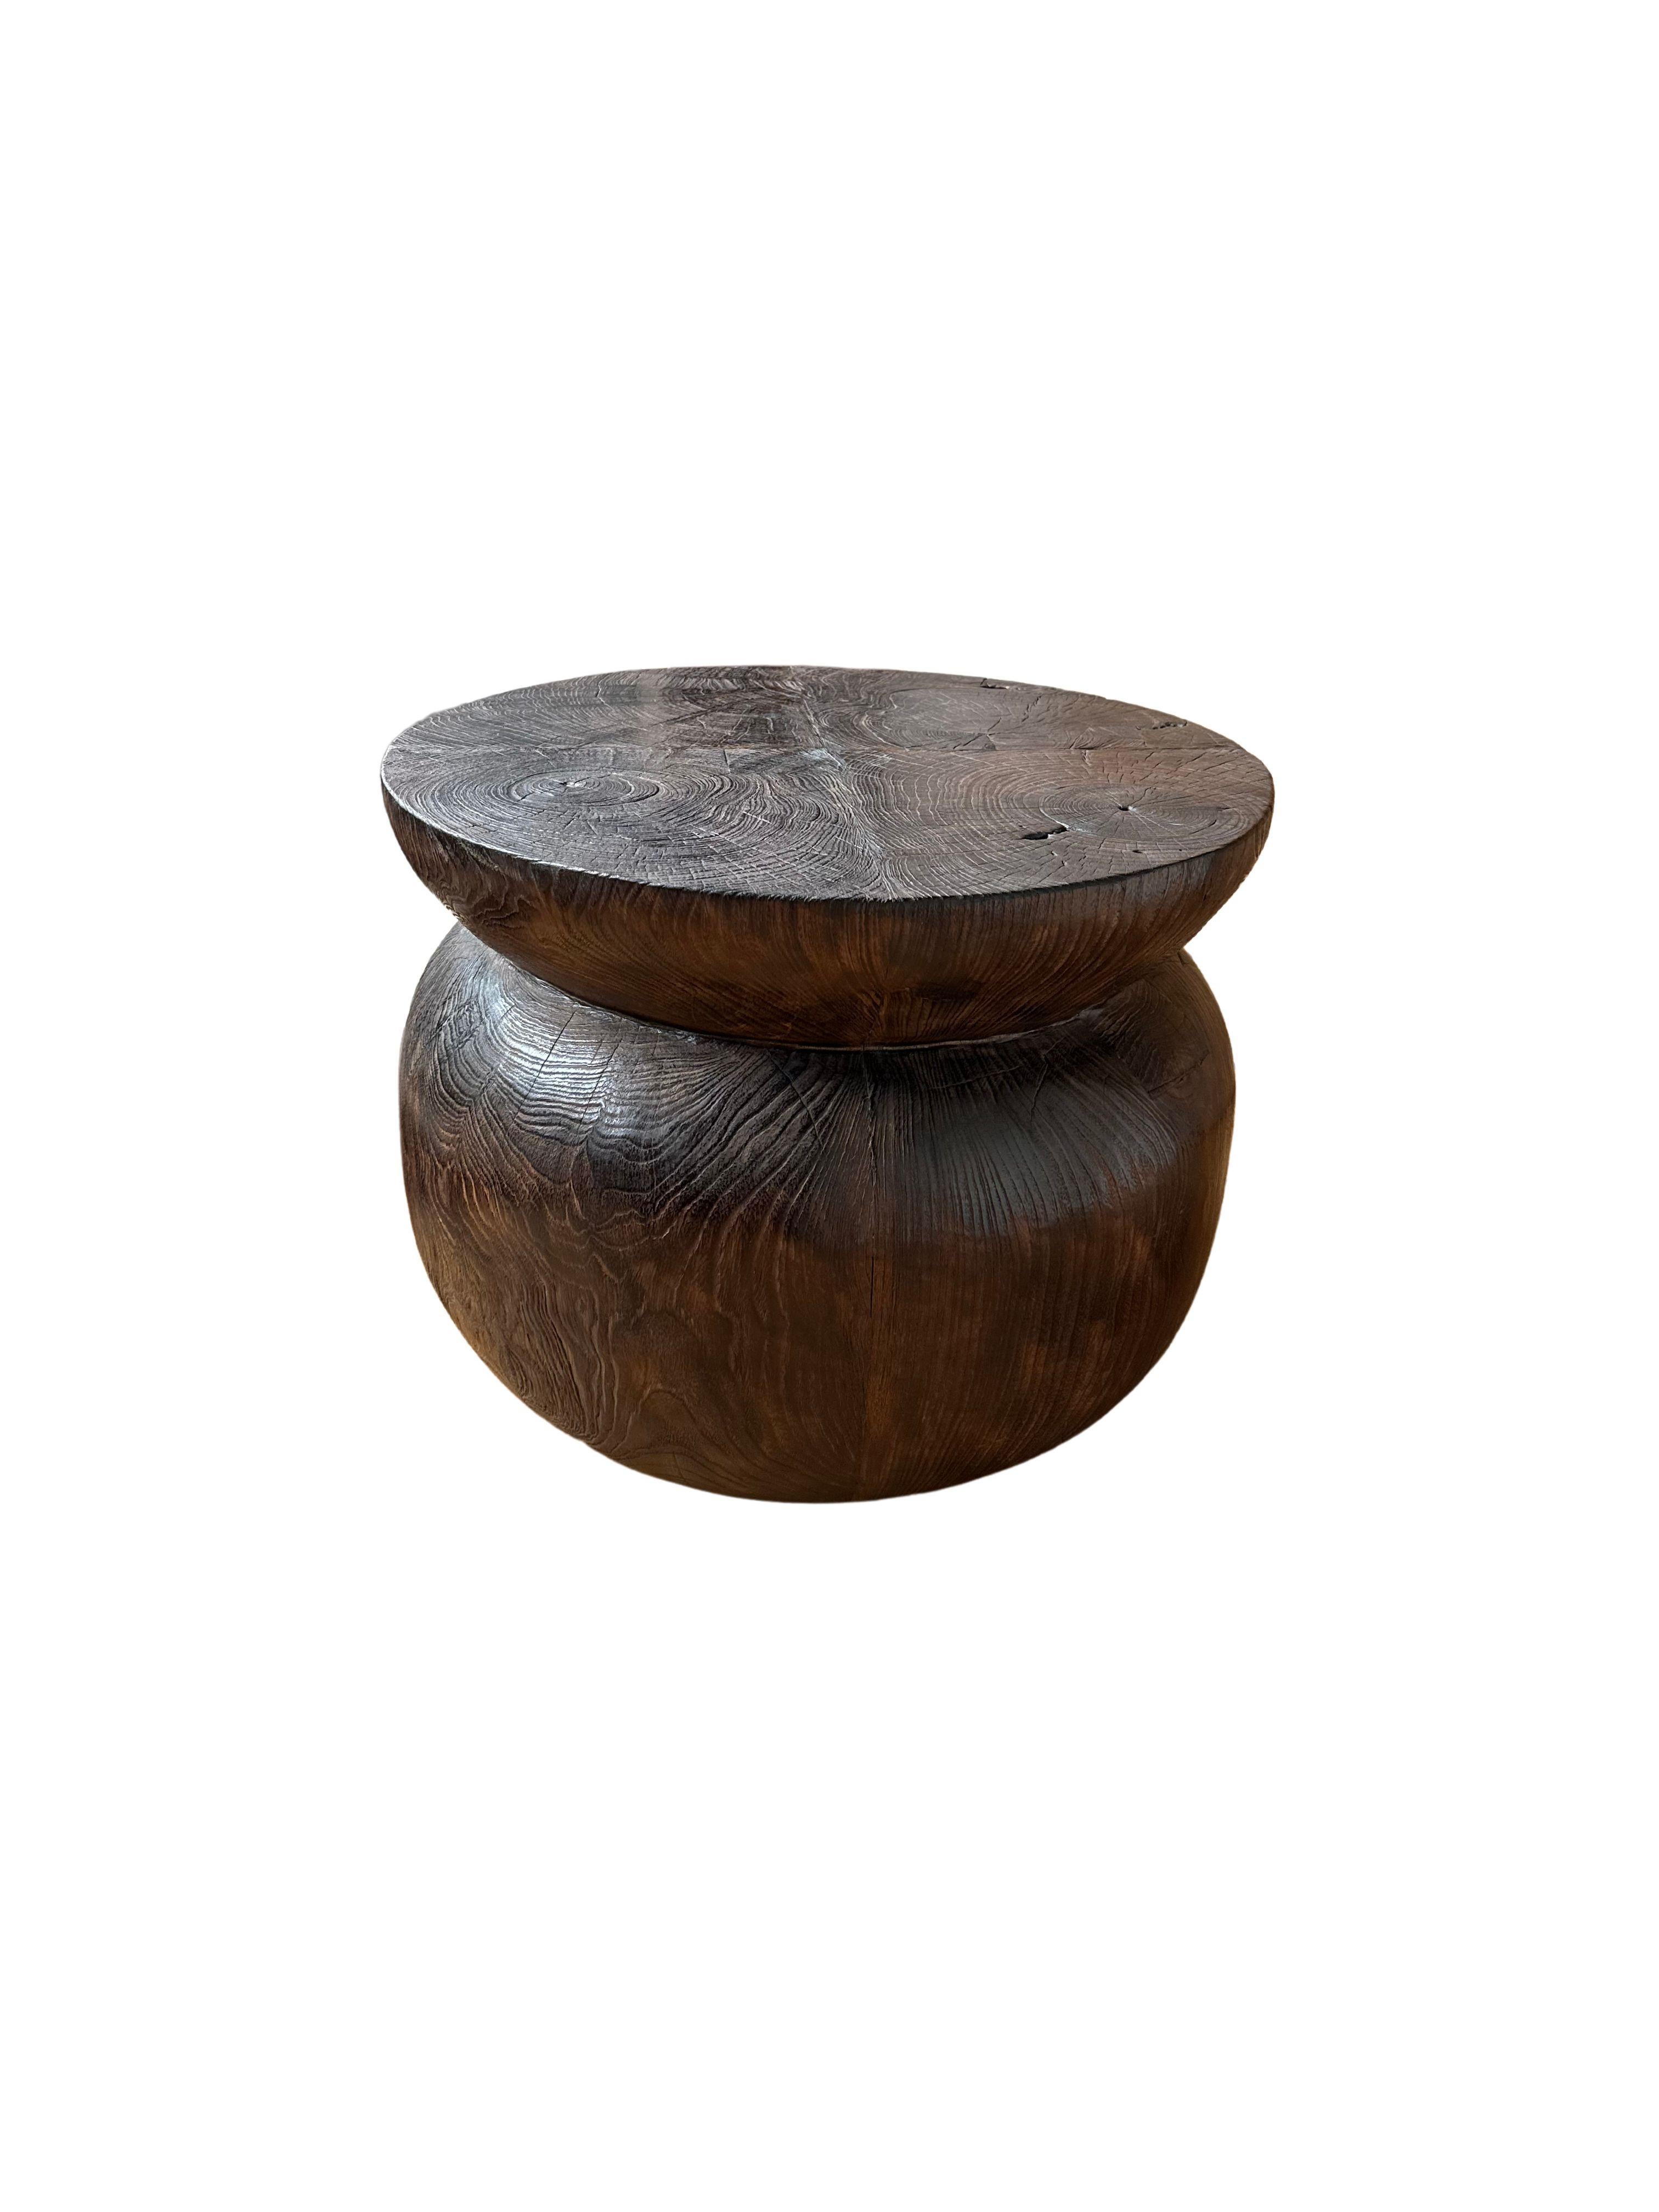 Hand-Crafted Sculptural Round Teak Wood Side Table, Burnt Finish, Modern Organic For Sale